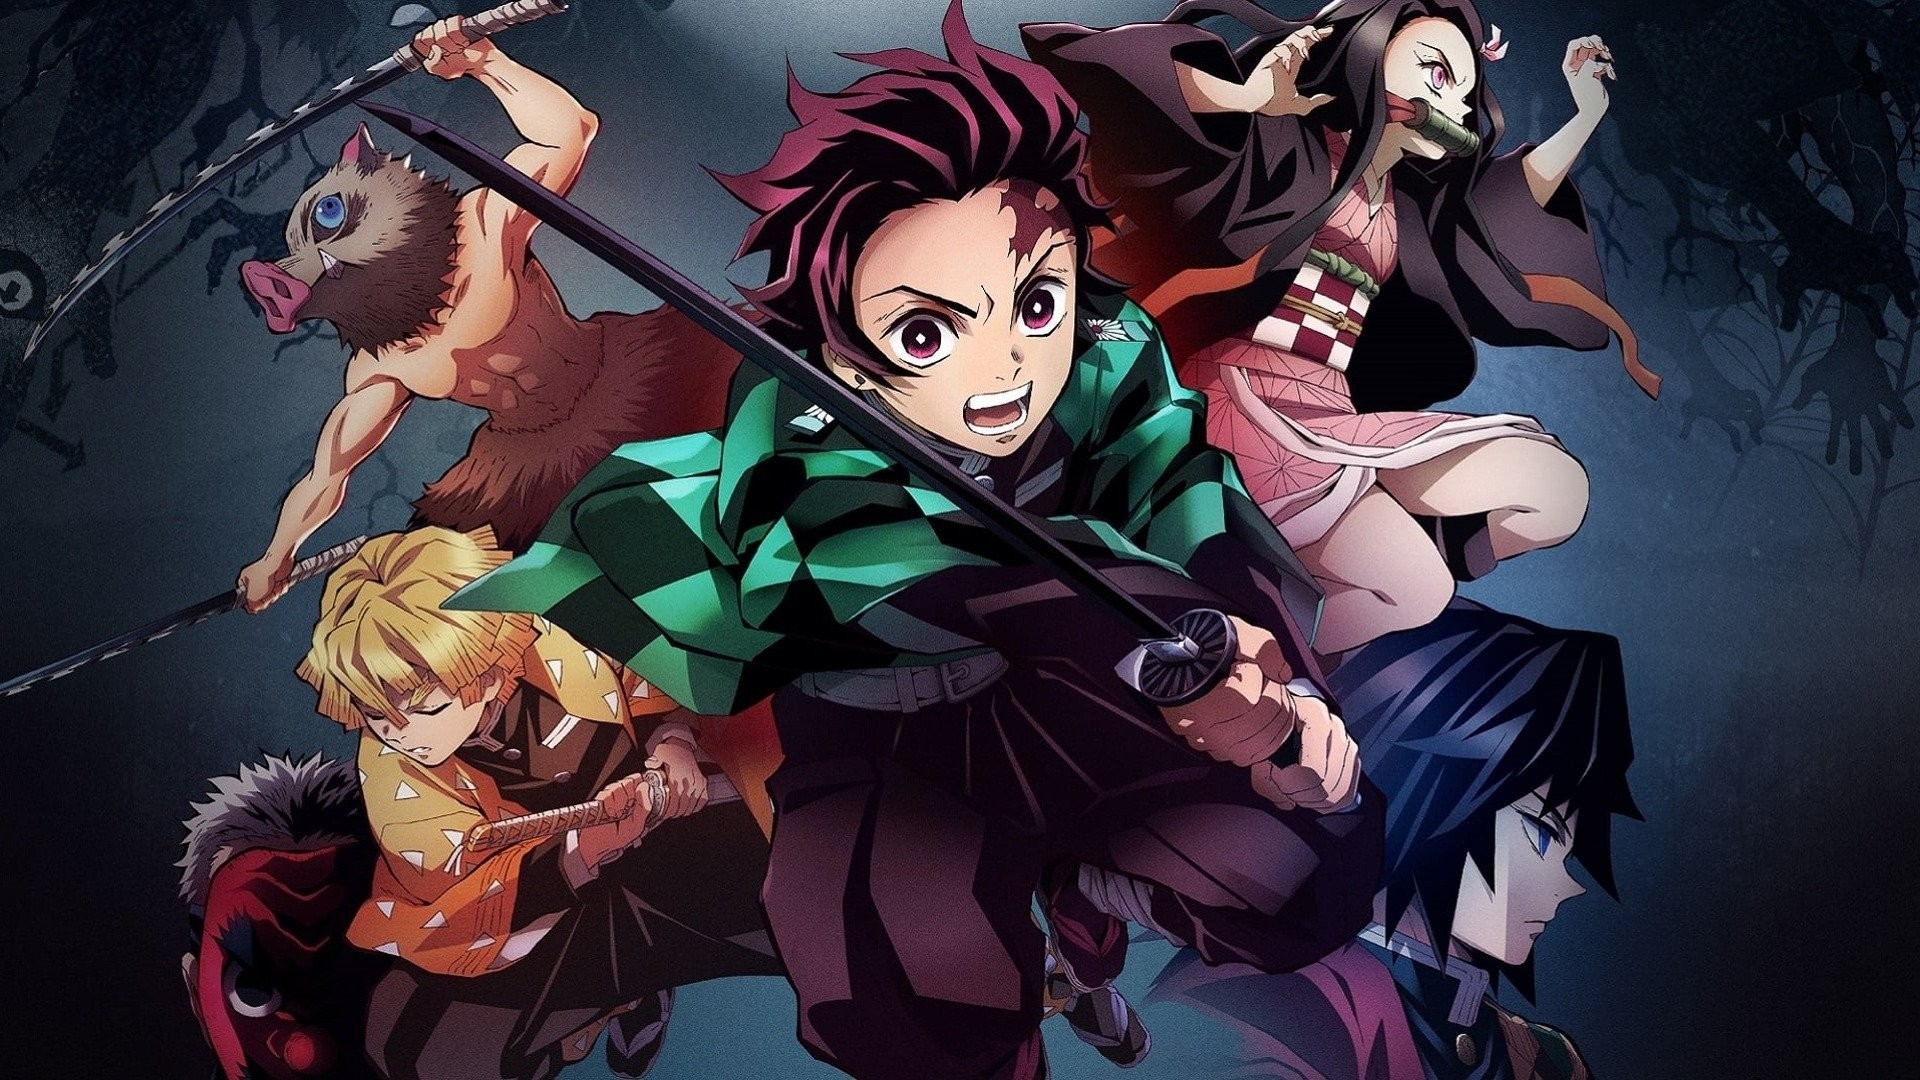 Demon Slayer: Kimetsu no Yaiba - A little late, but ready to provide back  up in a real flashy way ✨🐗😴 Episode 7 of Demon Slayer: Kimetsu no Yaiba  Entertainment District Arc